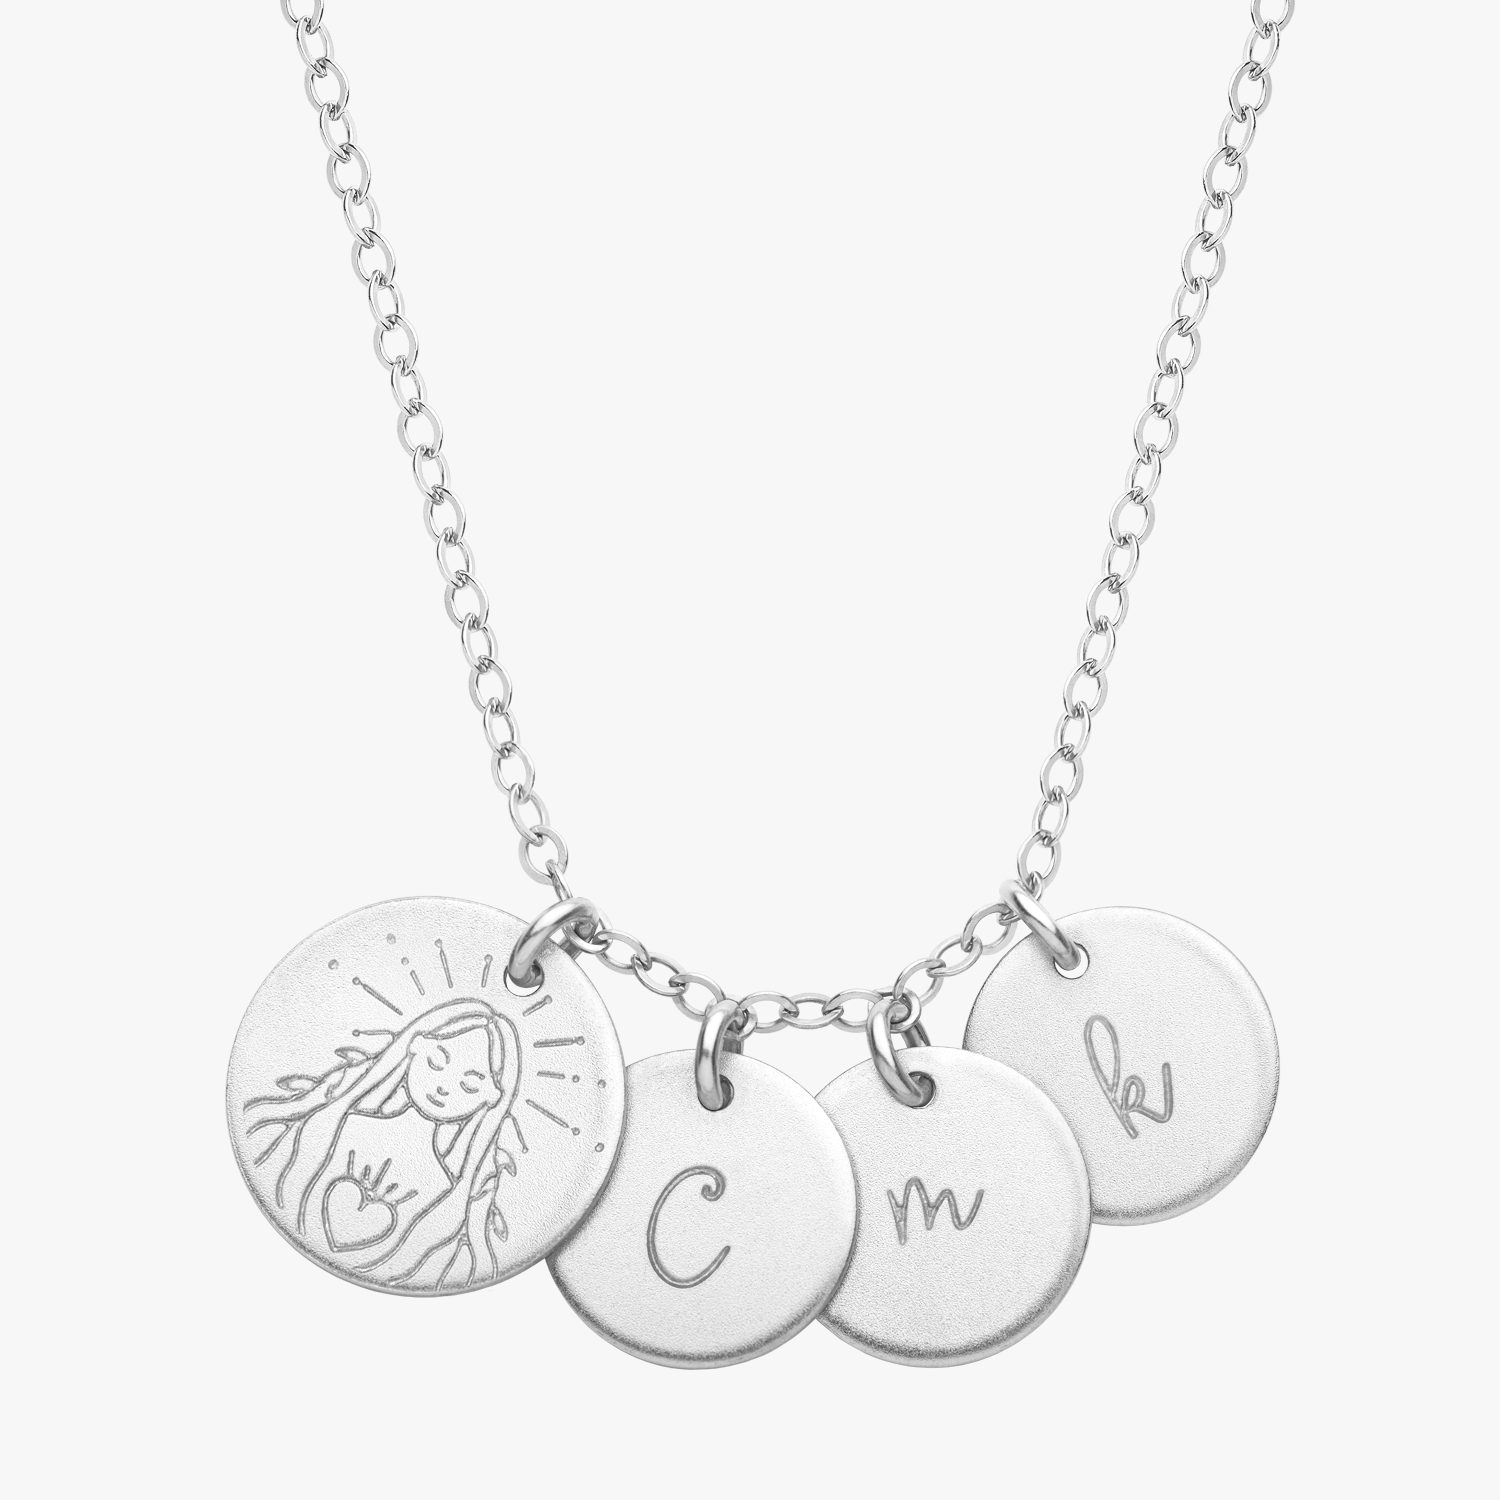 Personalized Empowerment Silver Necklace